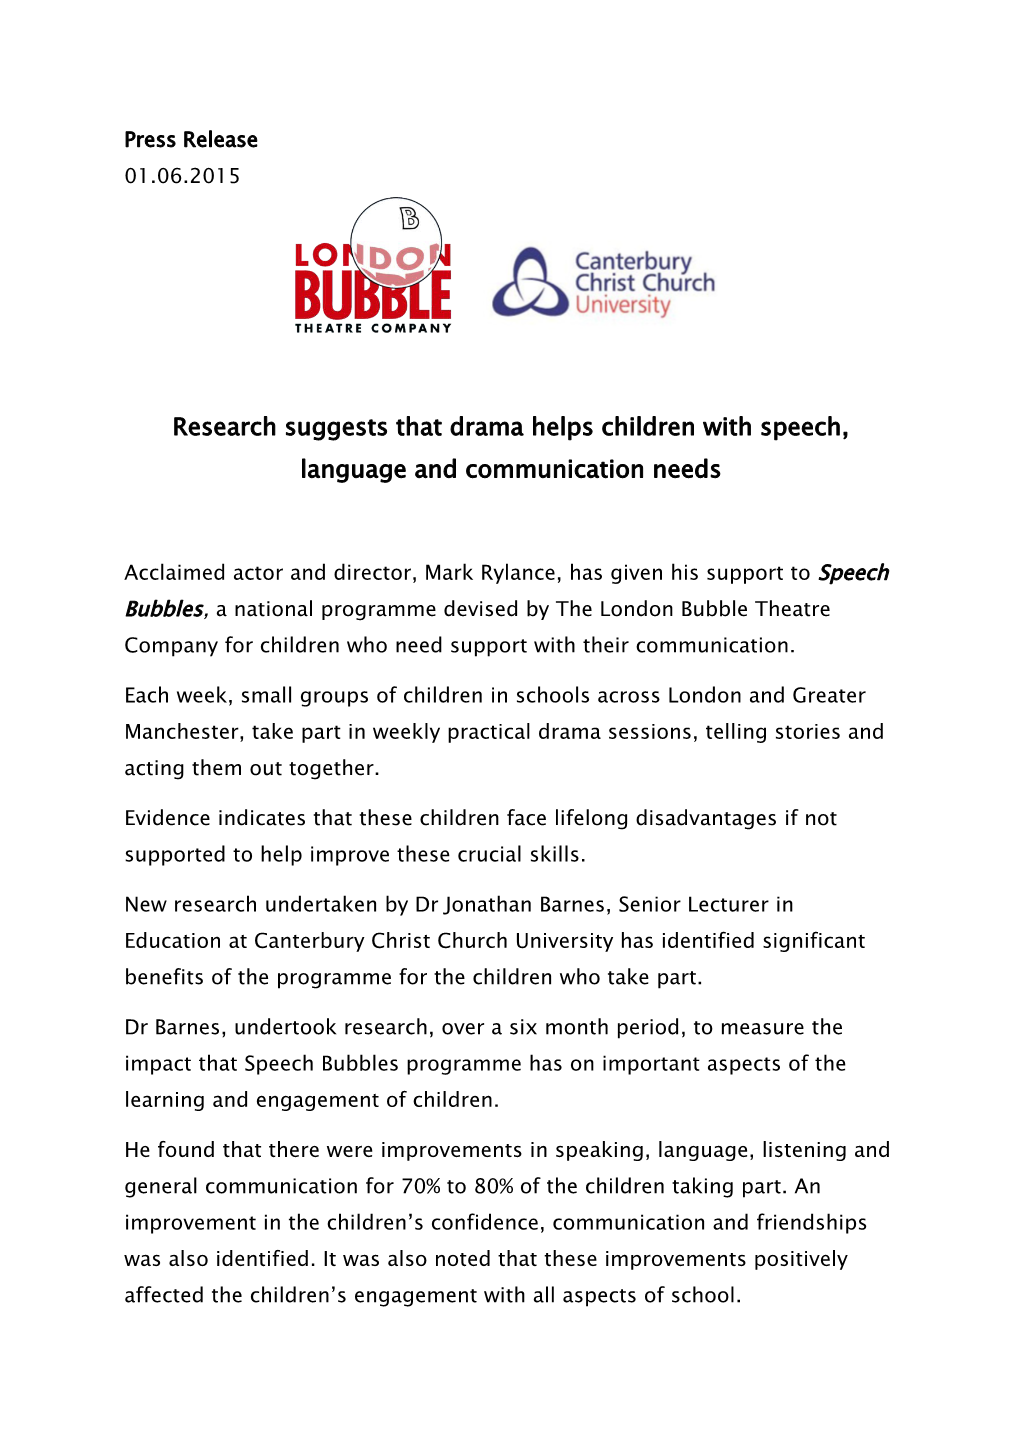 Research Suggeststhatdrama Helps Children with Speech, Language and Communication Needs